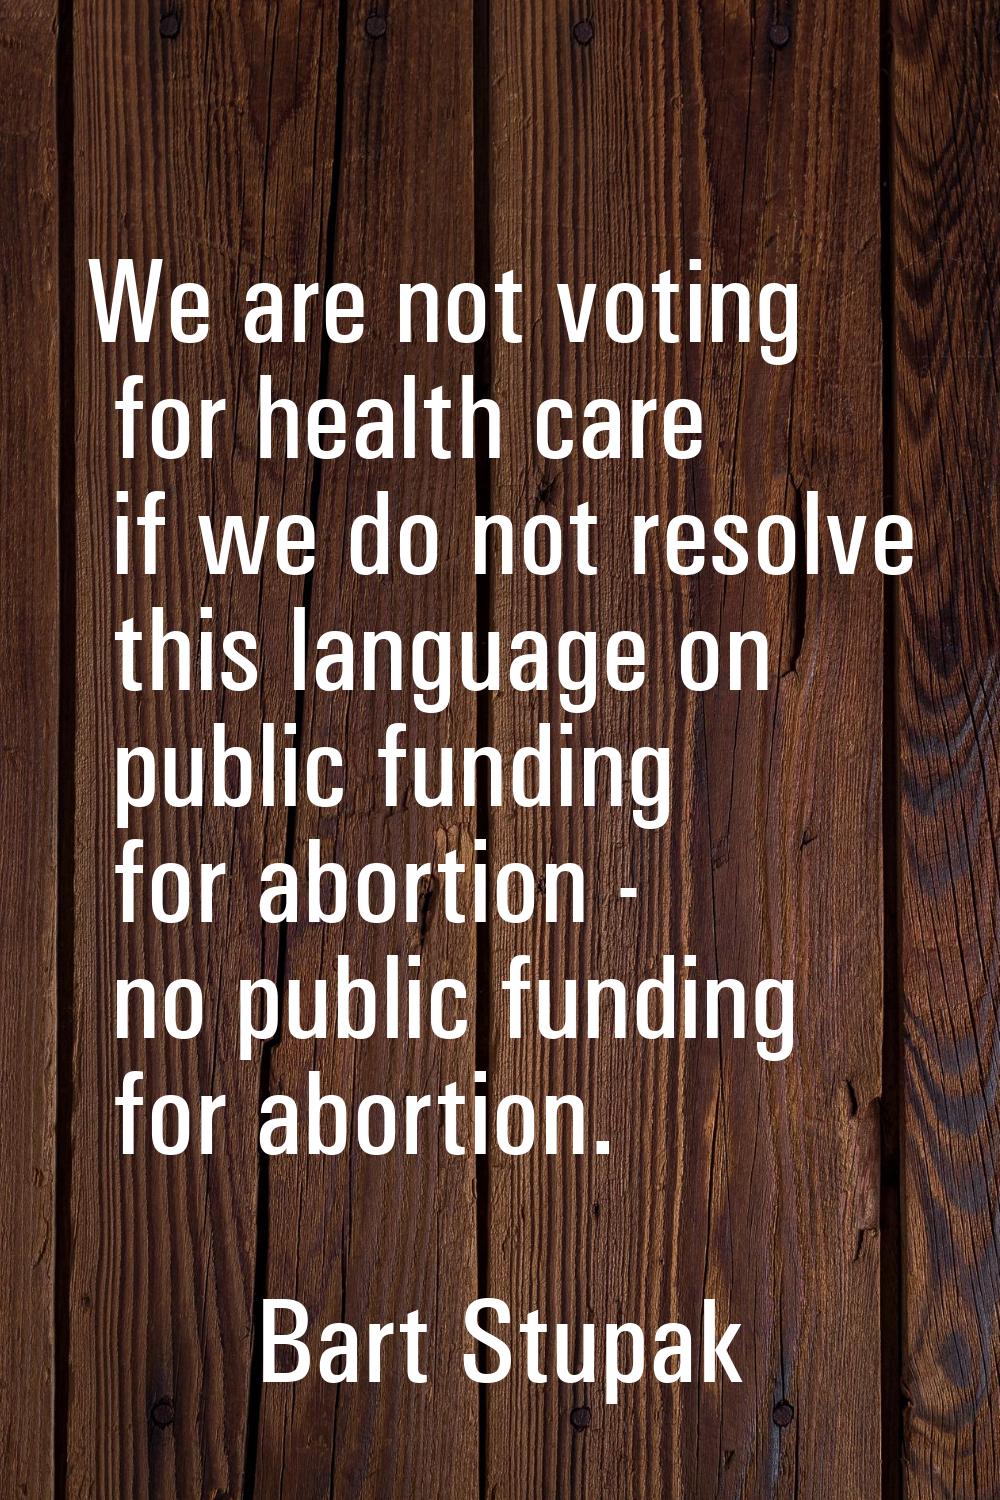 We are not voting for health care if we do not resolve this language on public funding for abortion